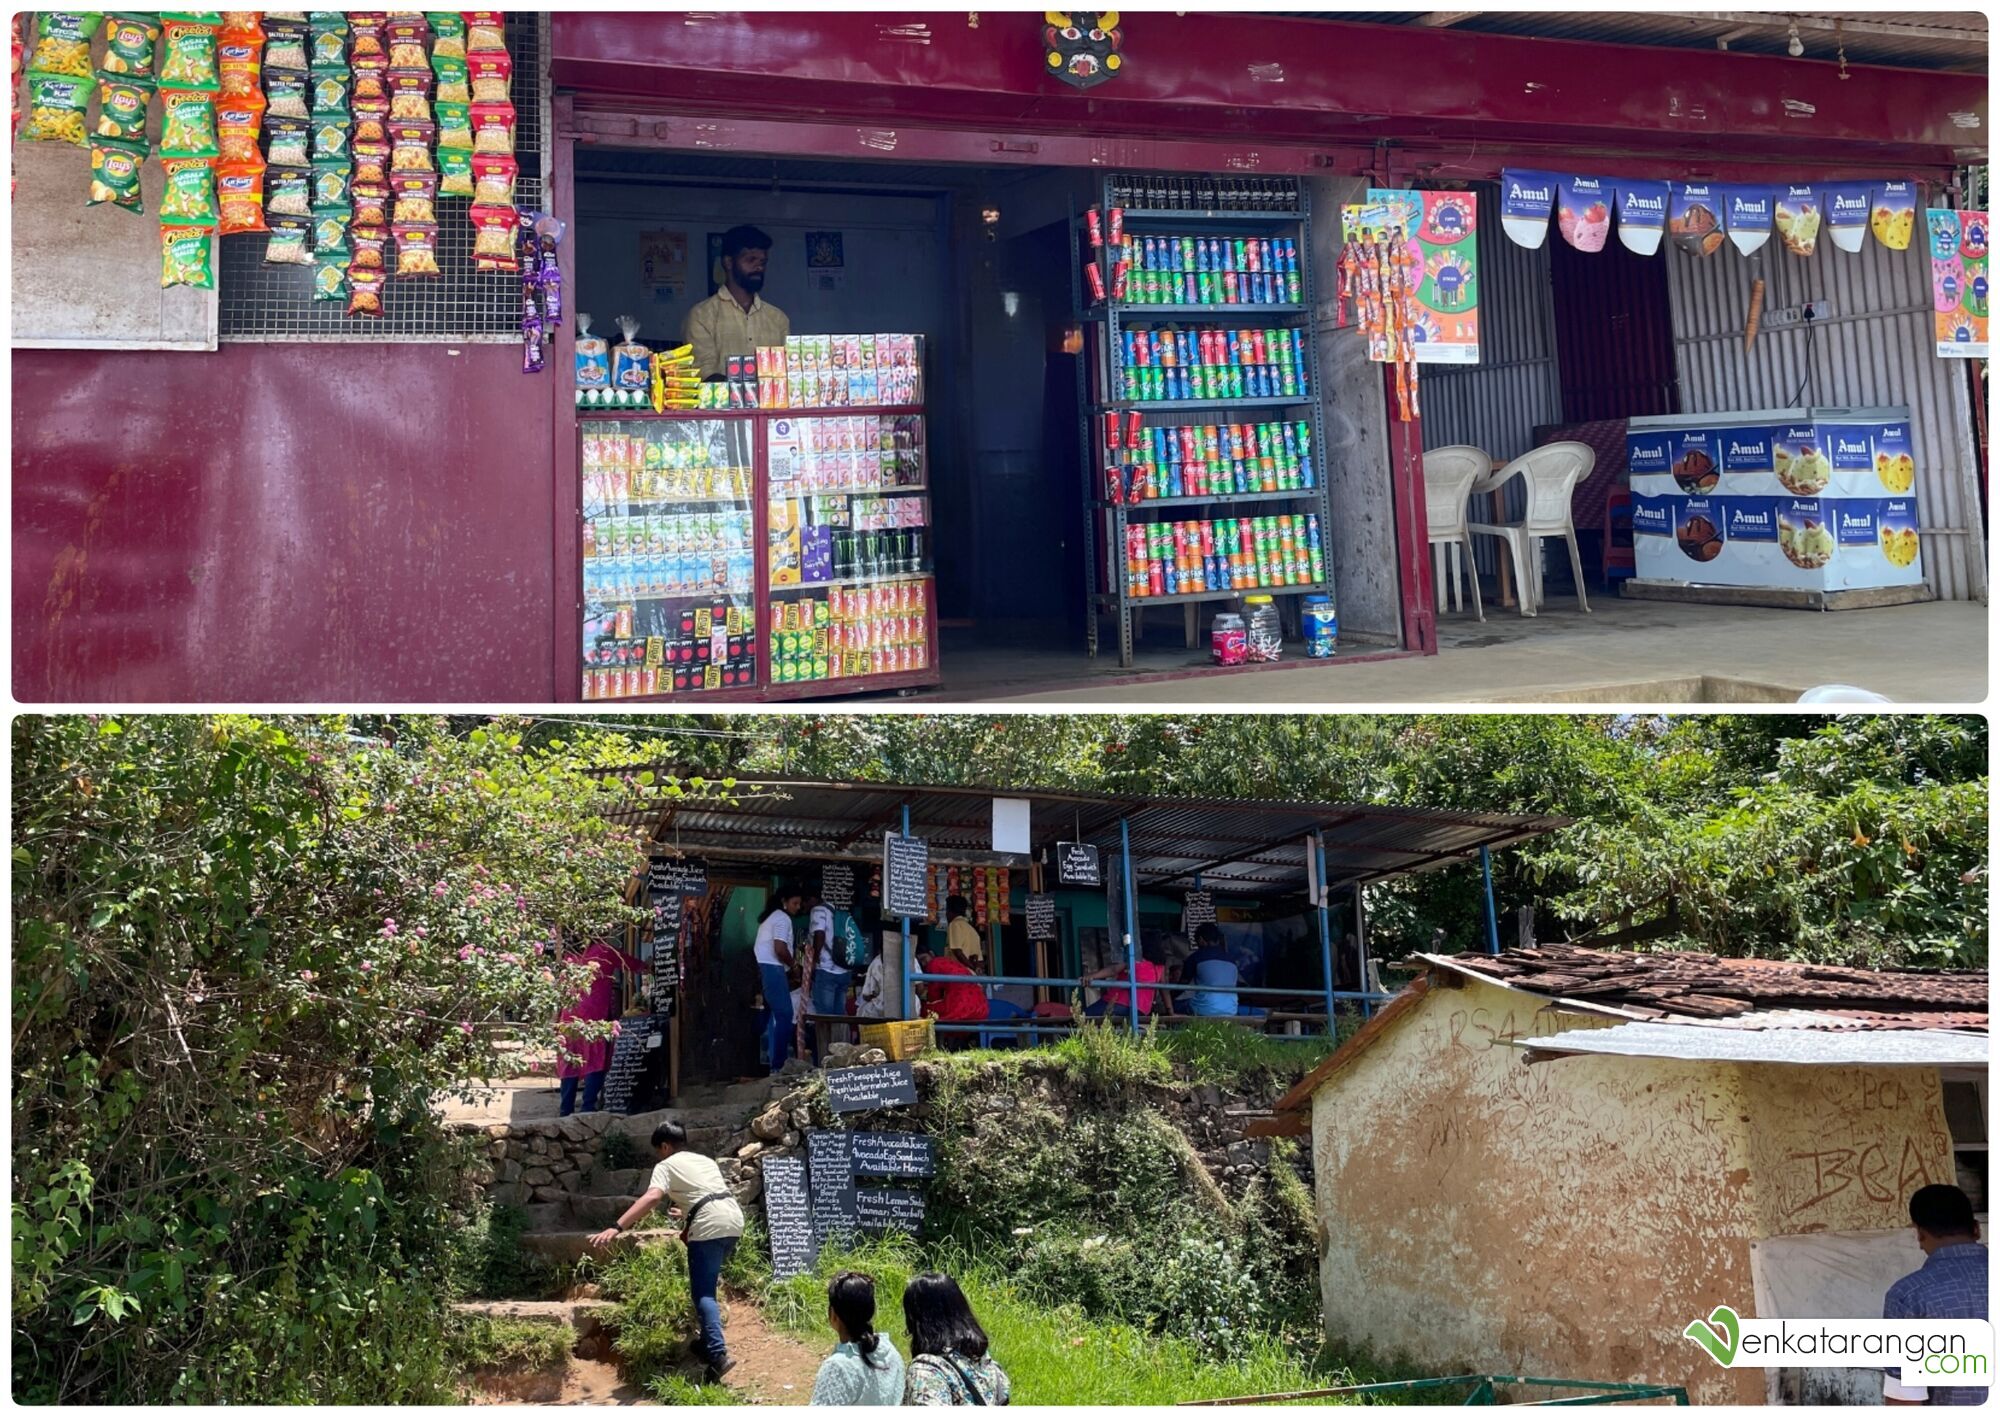 Shops selling juices, cold drinks and snacks enroute to Dolphin's nose, Kodaikanal